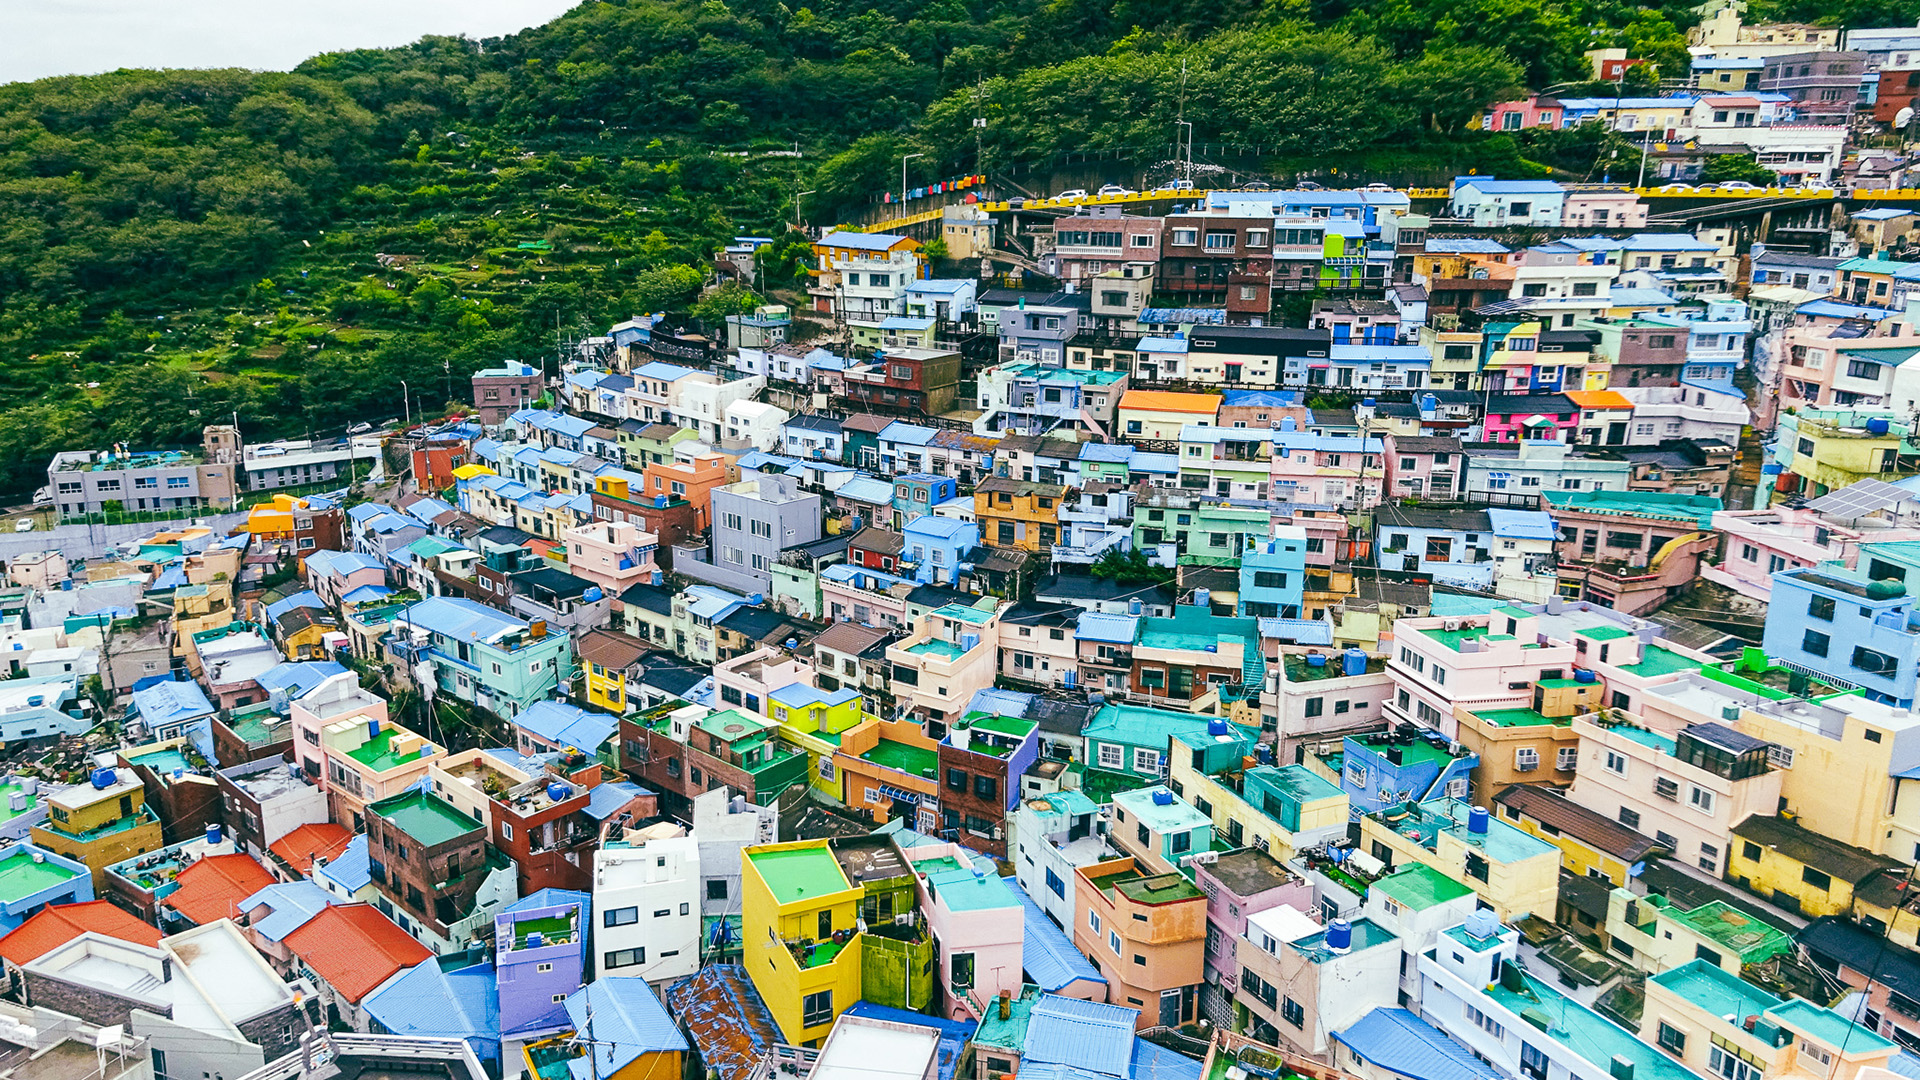 A sea of colorful house on a hill in South Korea